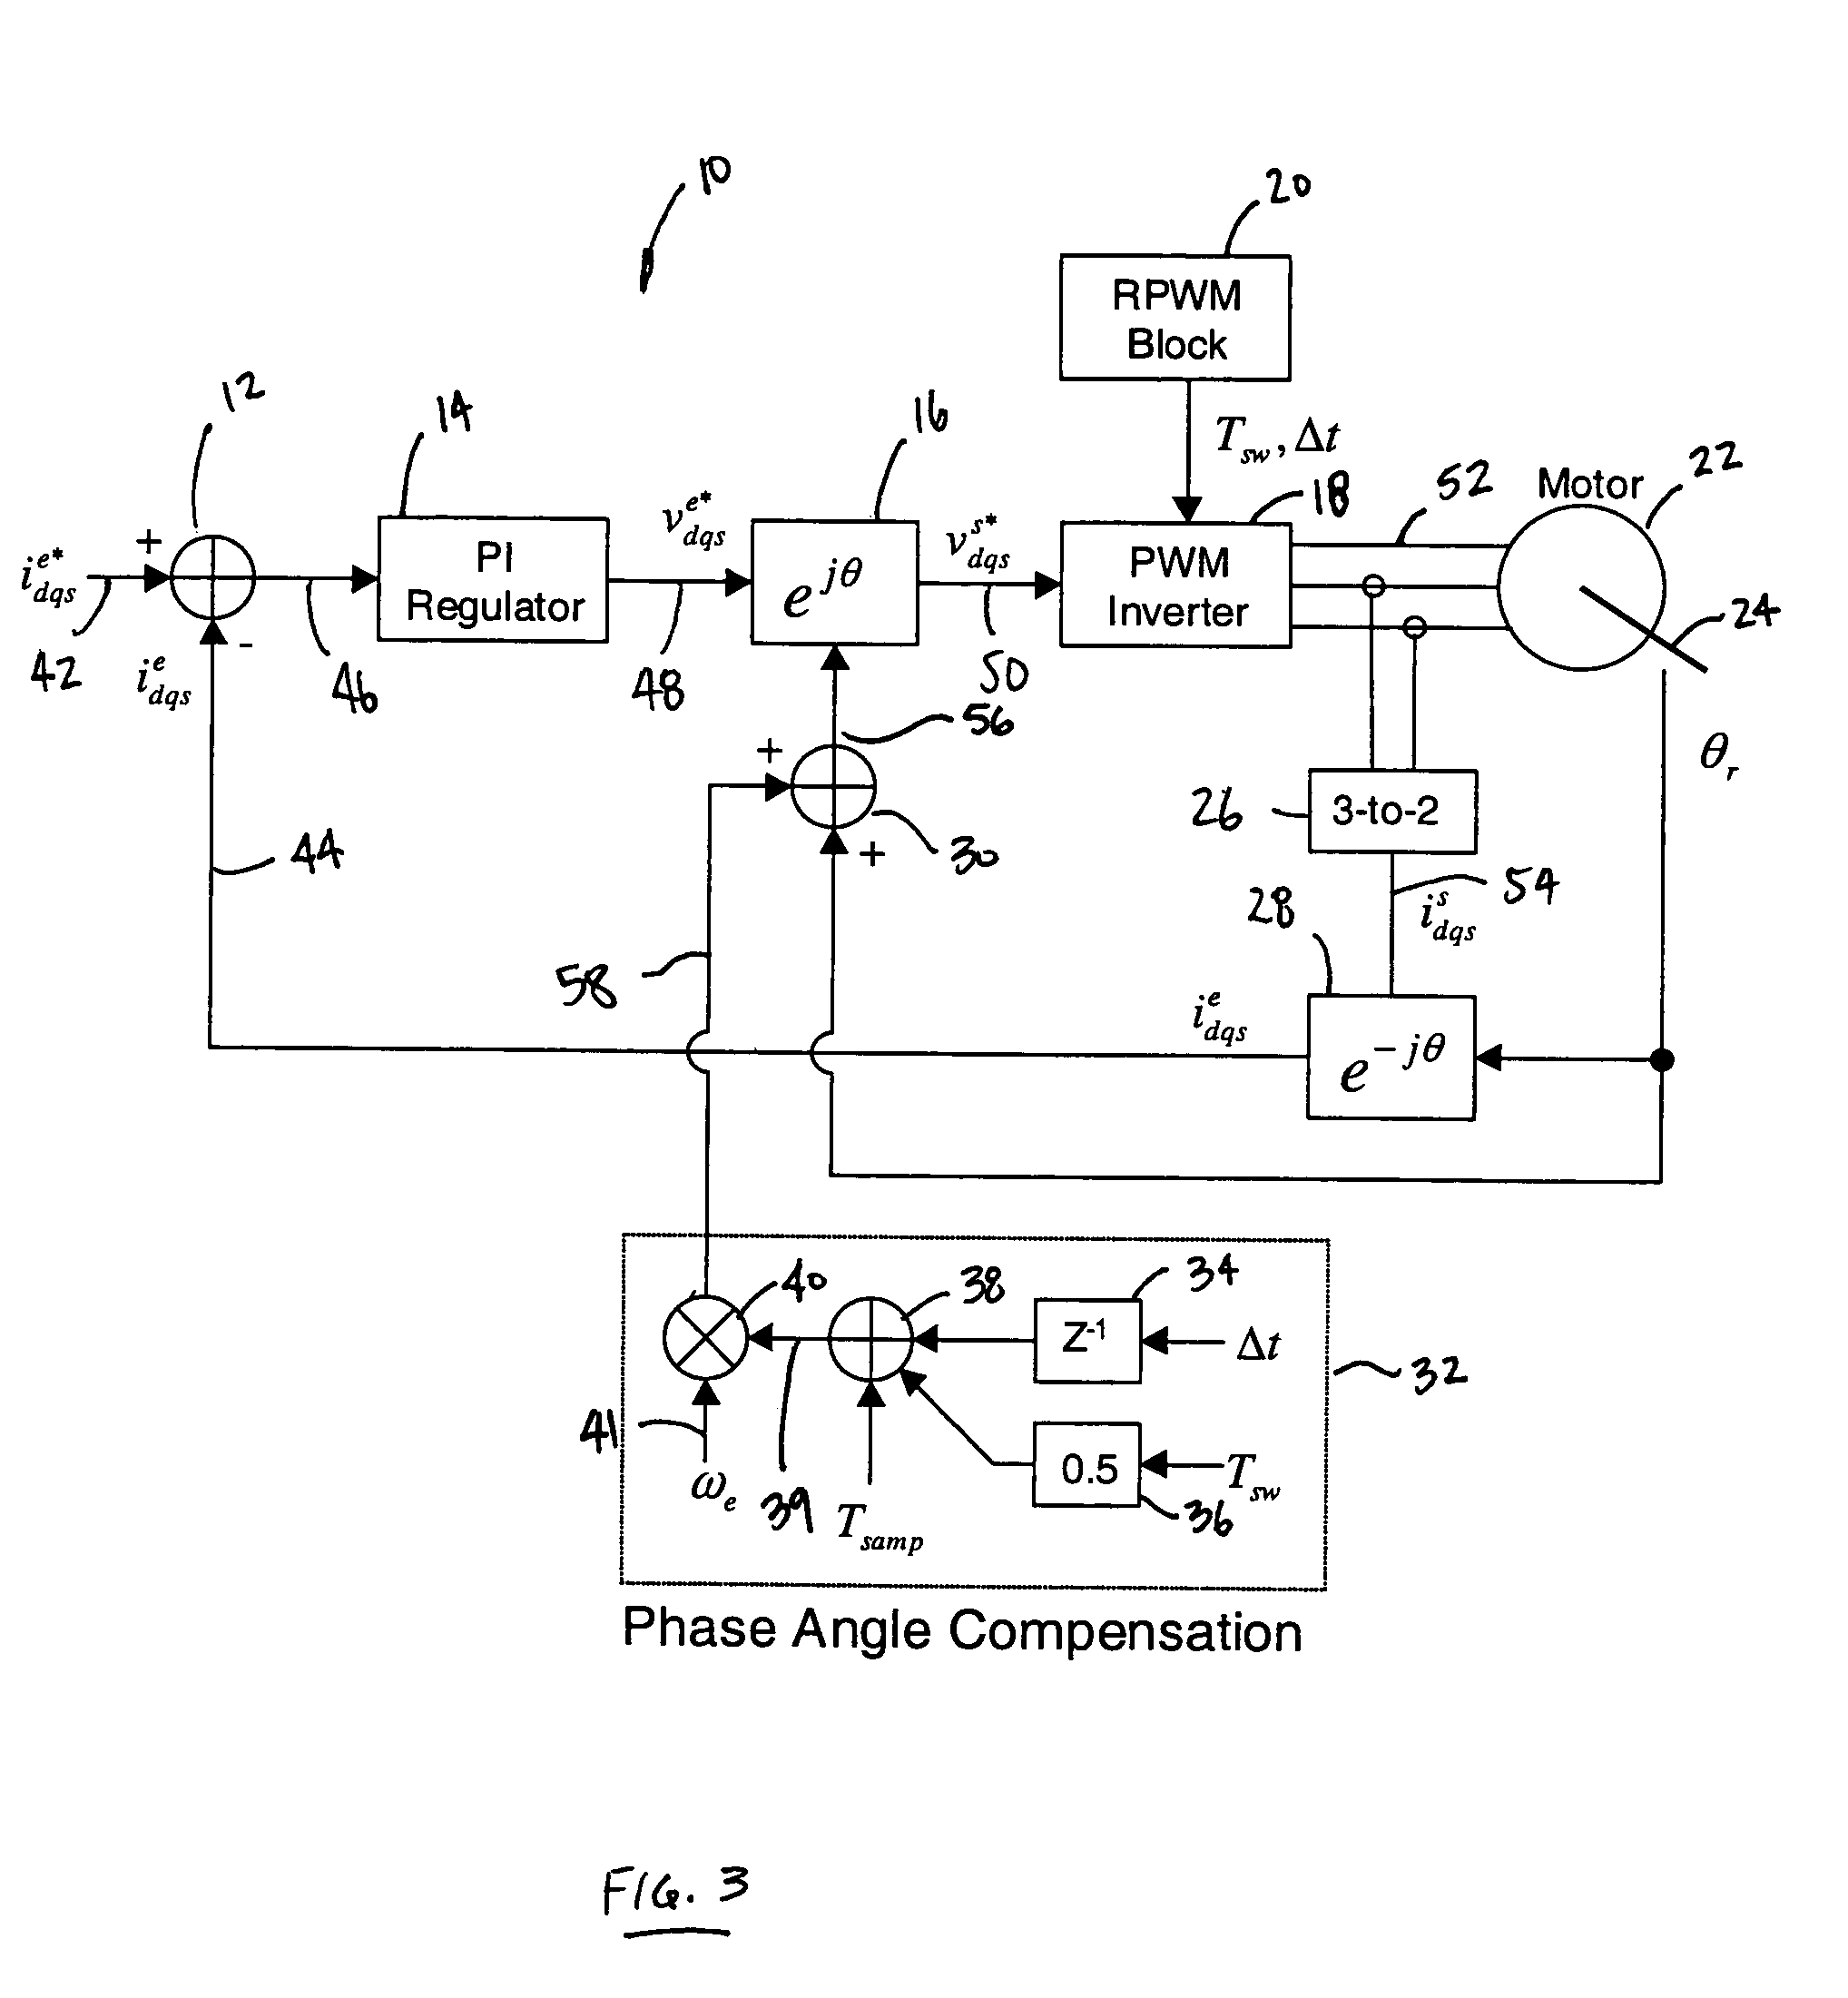 Delay compensation for stable current regulation when using variable-delay random PWM switching